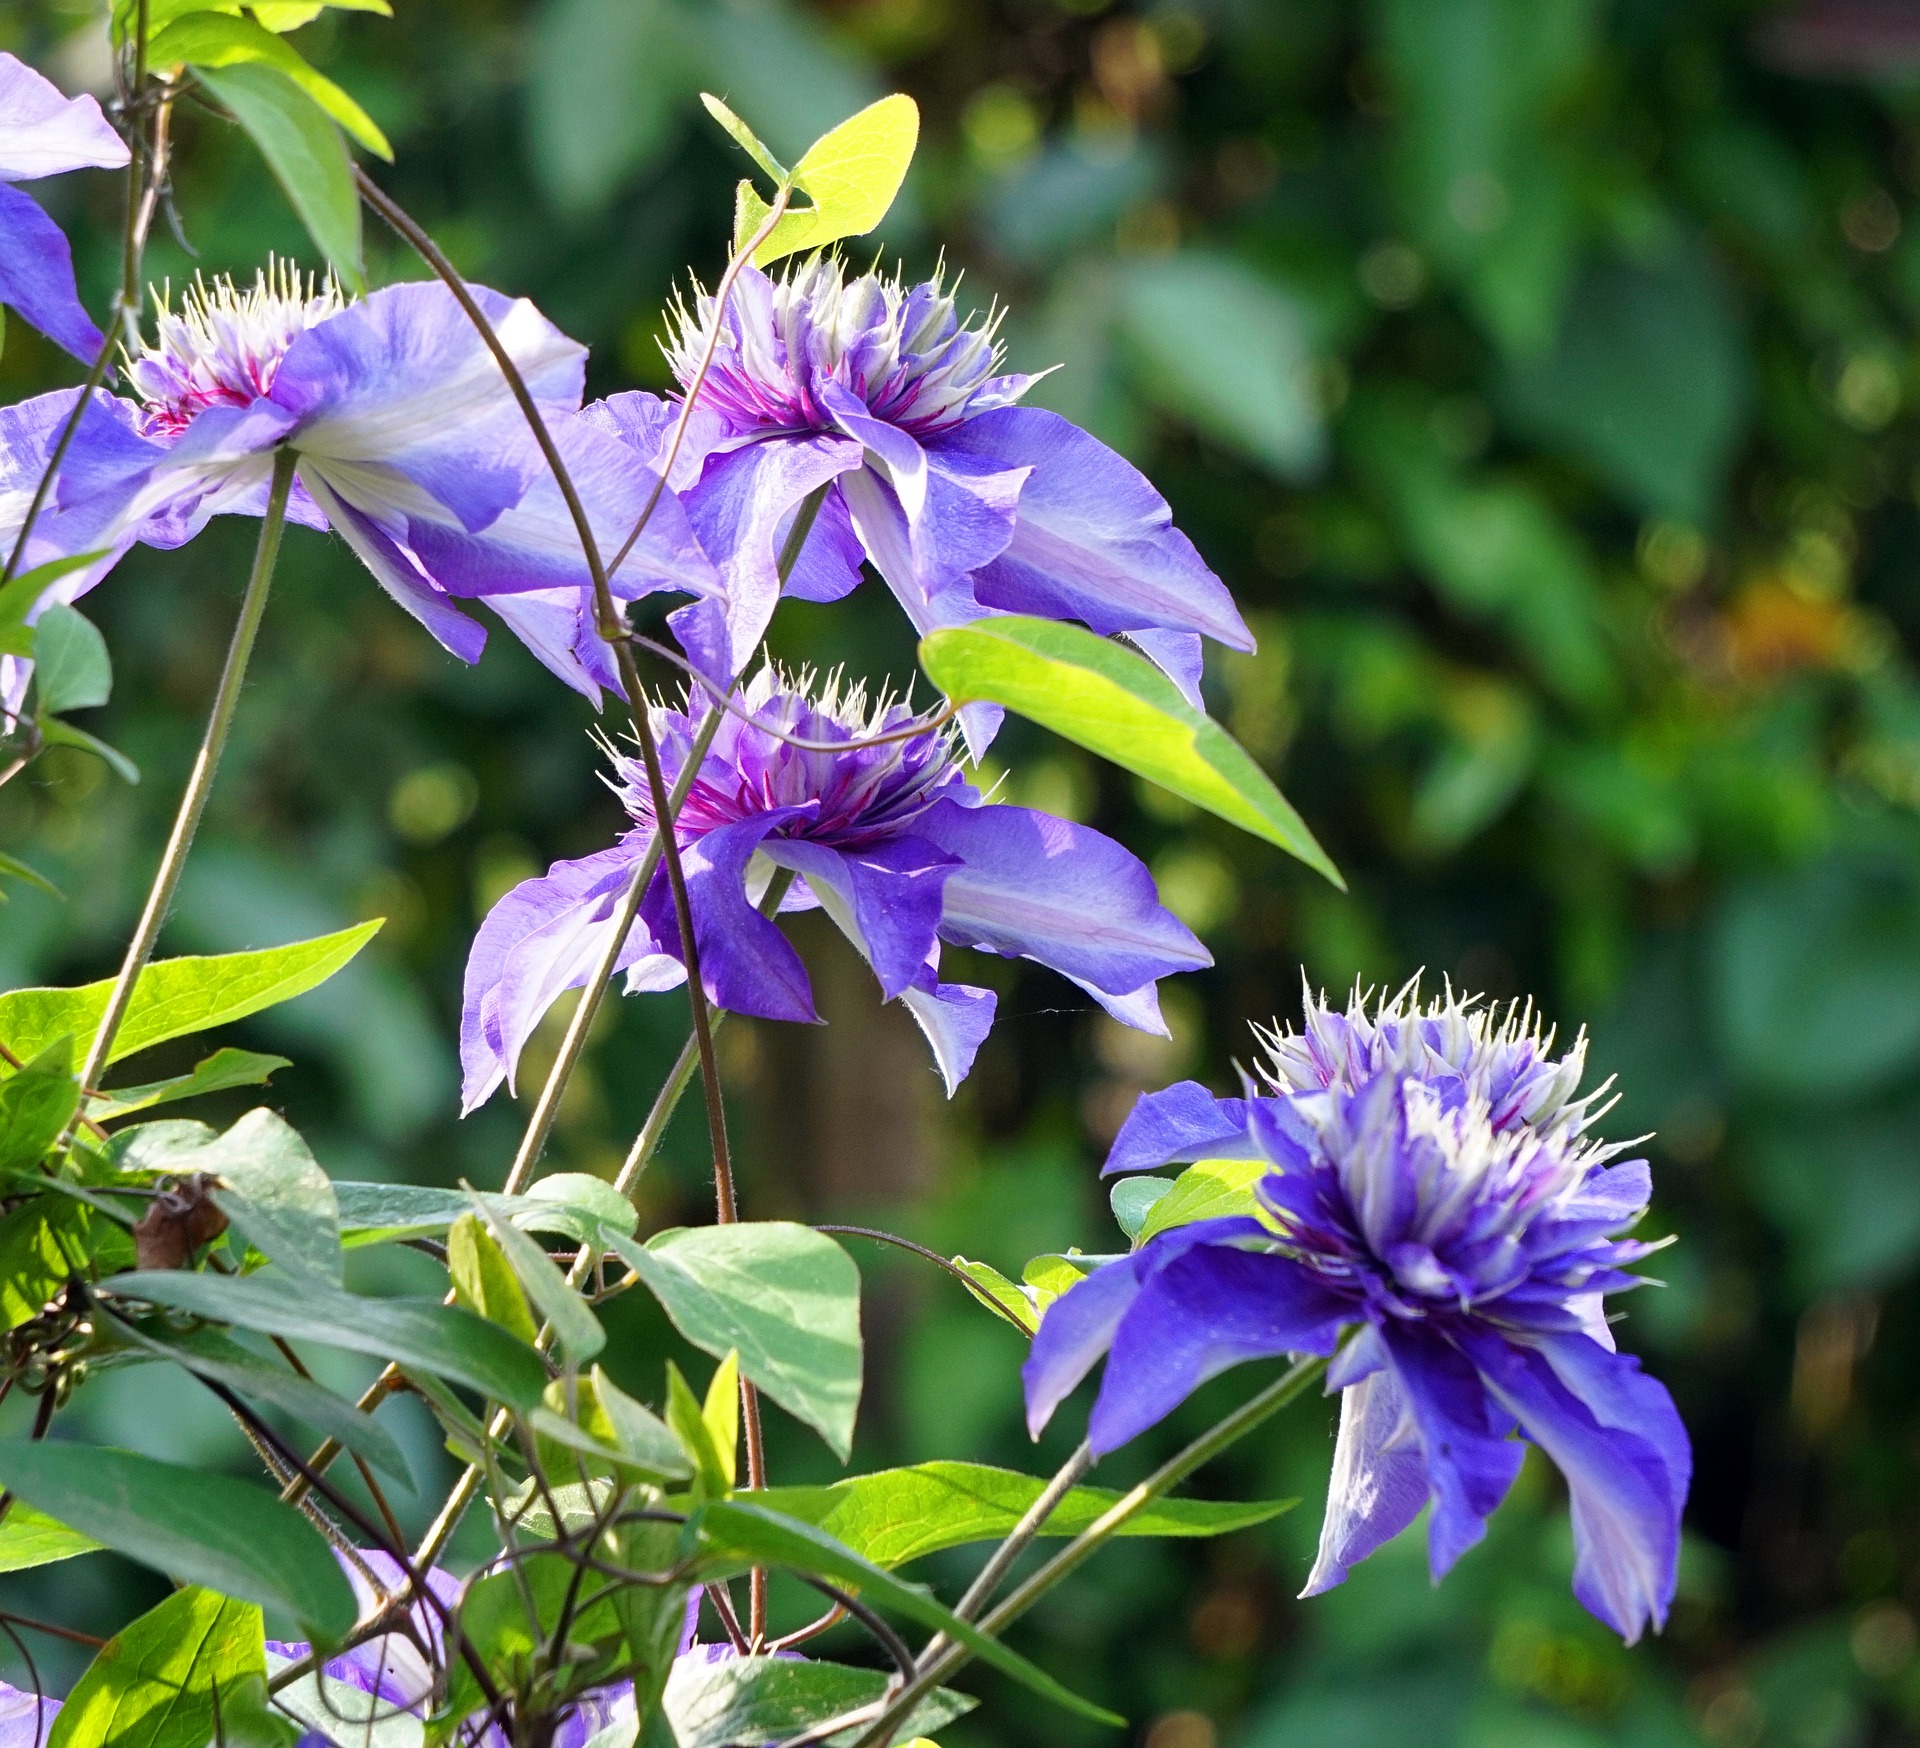 20 Beautiful Yet Poisonous Flowers You Should Only Plant with Caution